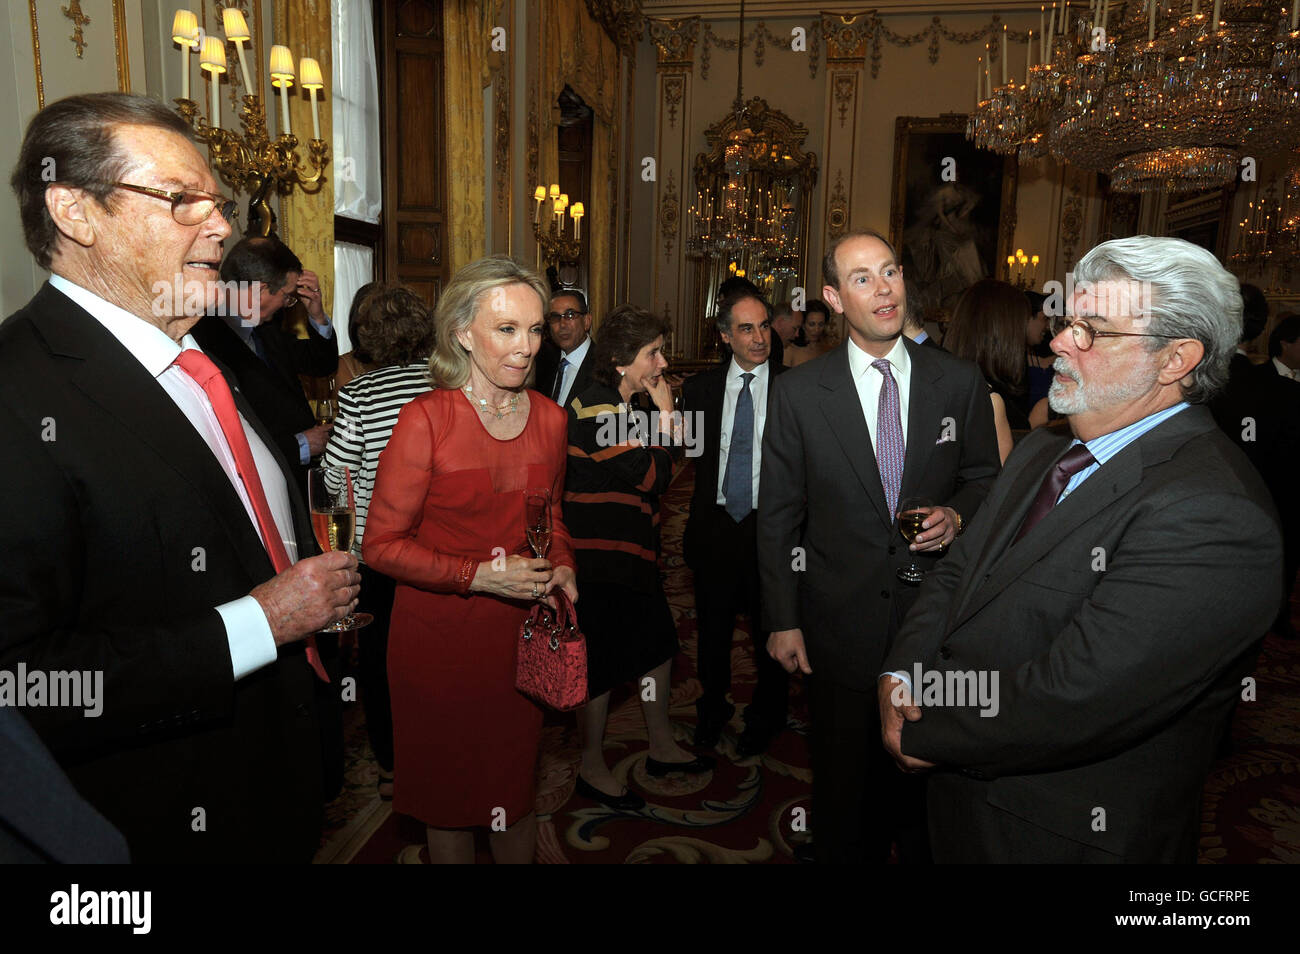 The Earl of Wessex (second right) meets Sir Roger Moore, his wife Kristina, and George Lucas (right) at a drinks reception for the 'Film without Borders' charity at Buckingham Palace in central London. Stock Photo